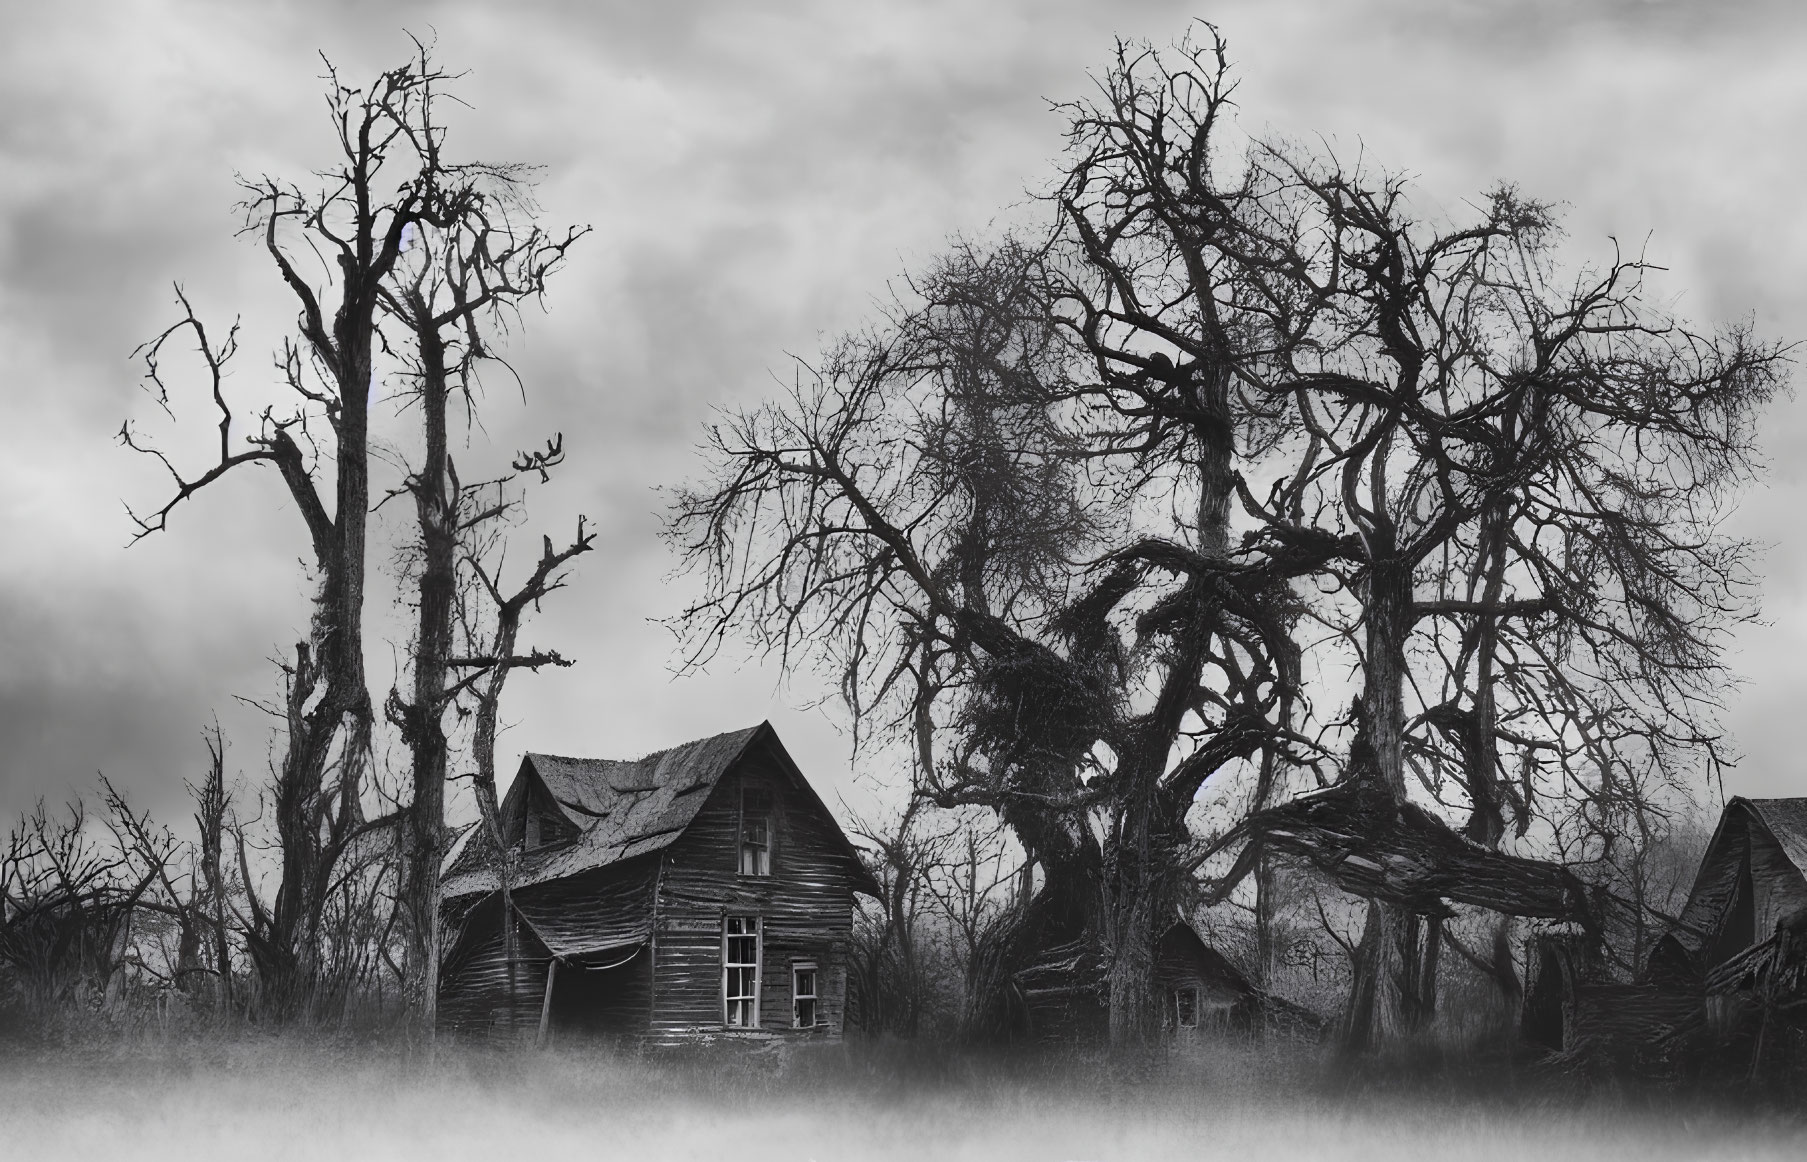 Grayscale image of eerie, dilapidated house & leafless trees in misty sky